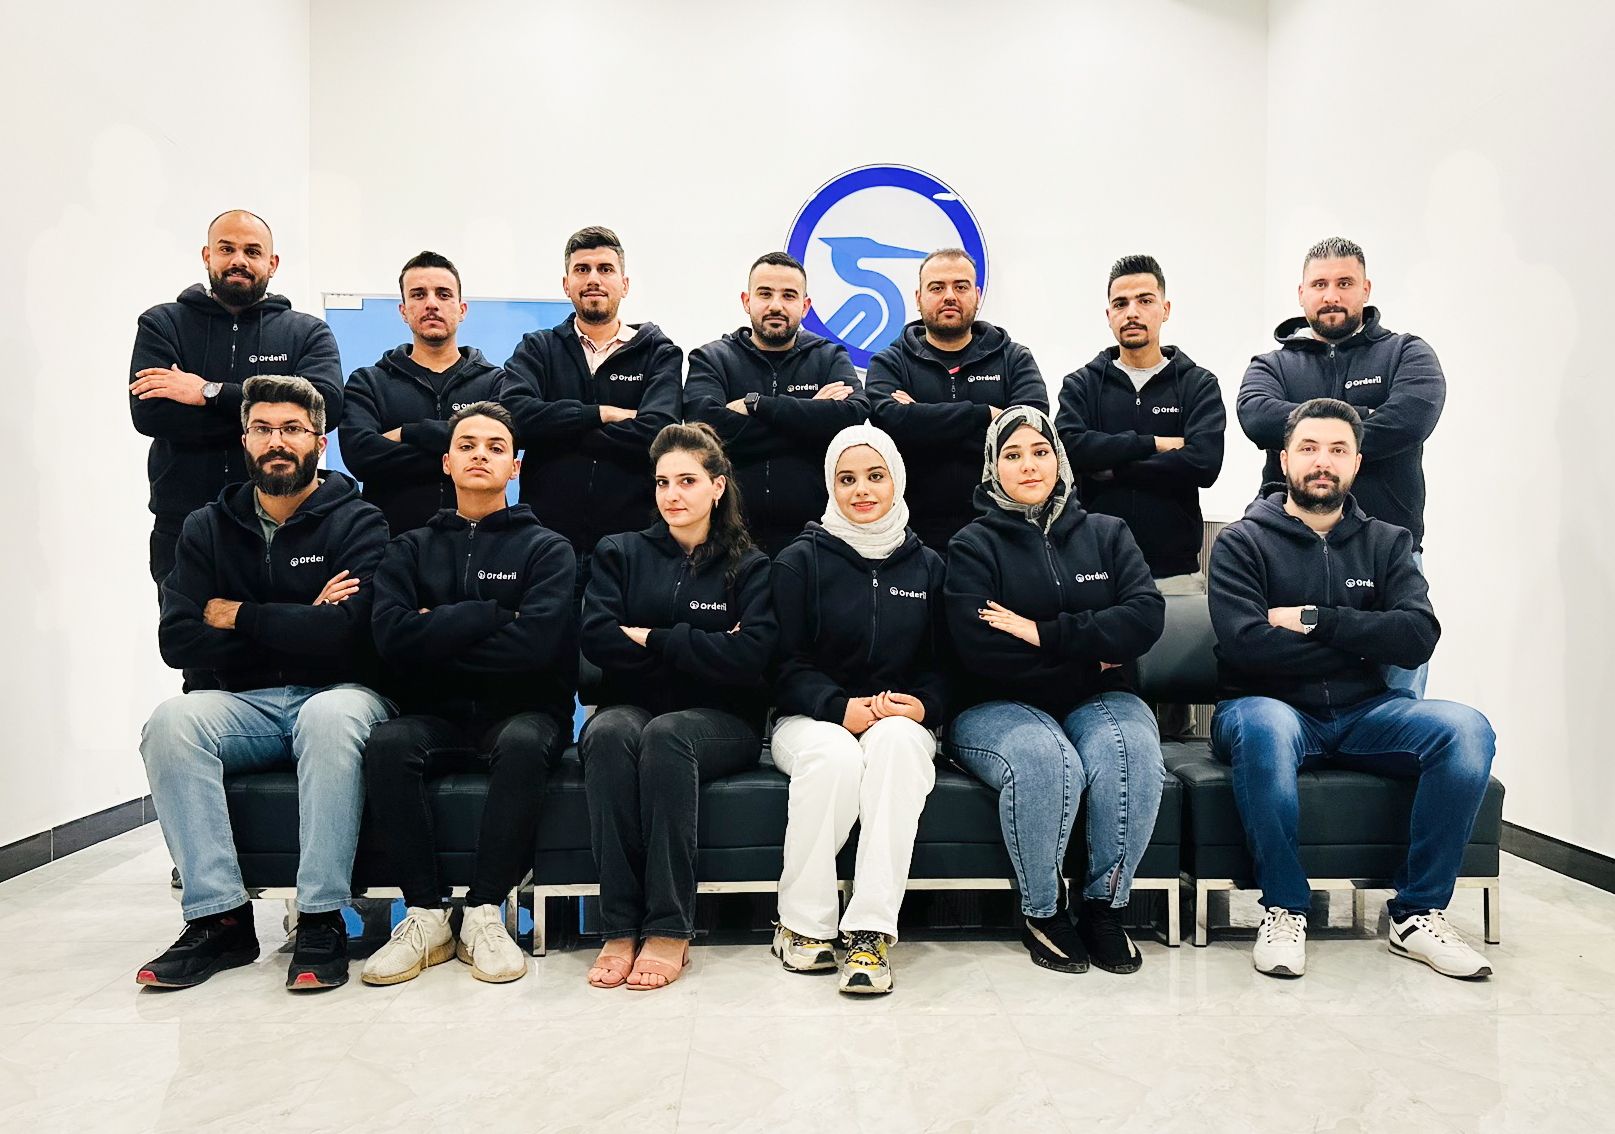 Baghdad-based Orderii Receives Funding for Pre-Seed Round